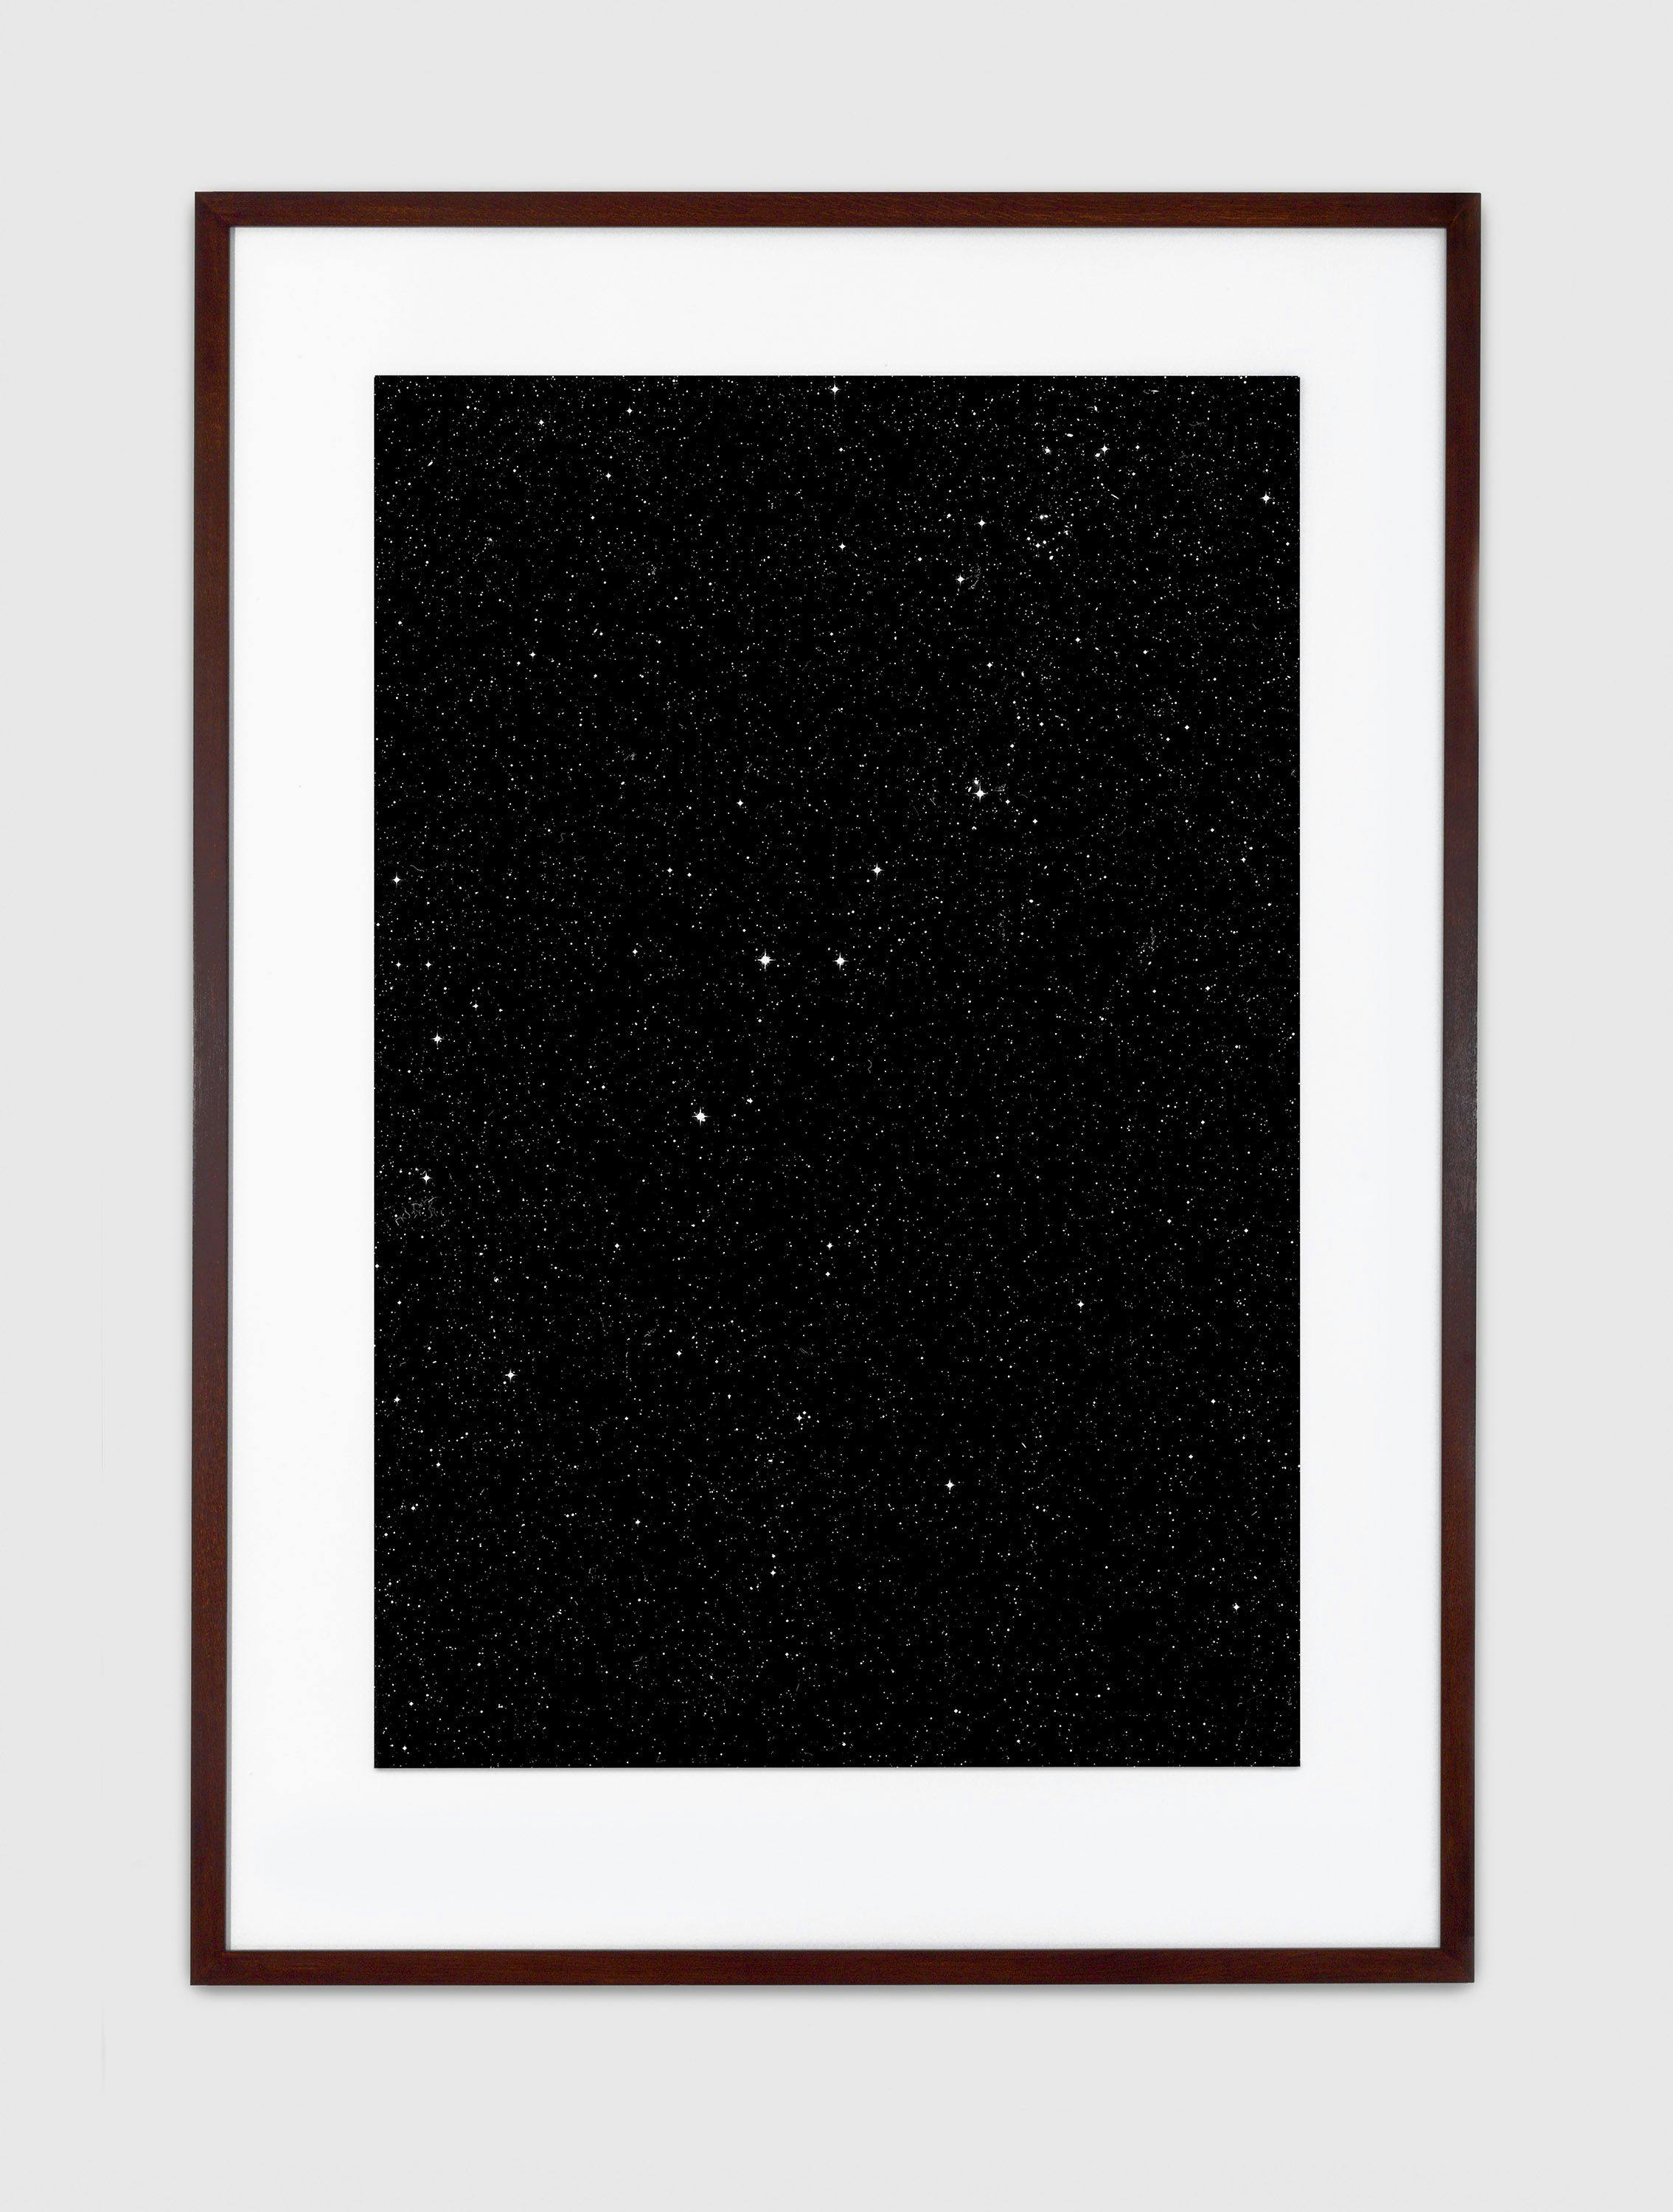 A chromogenic print with Diasec by Thomas Ruff, titled Stern 20h 54m/-55°, dated 1990.